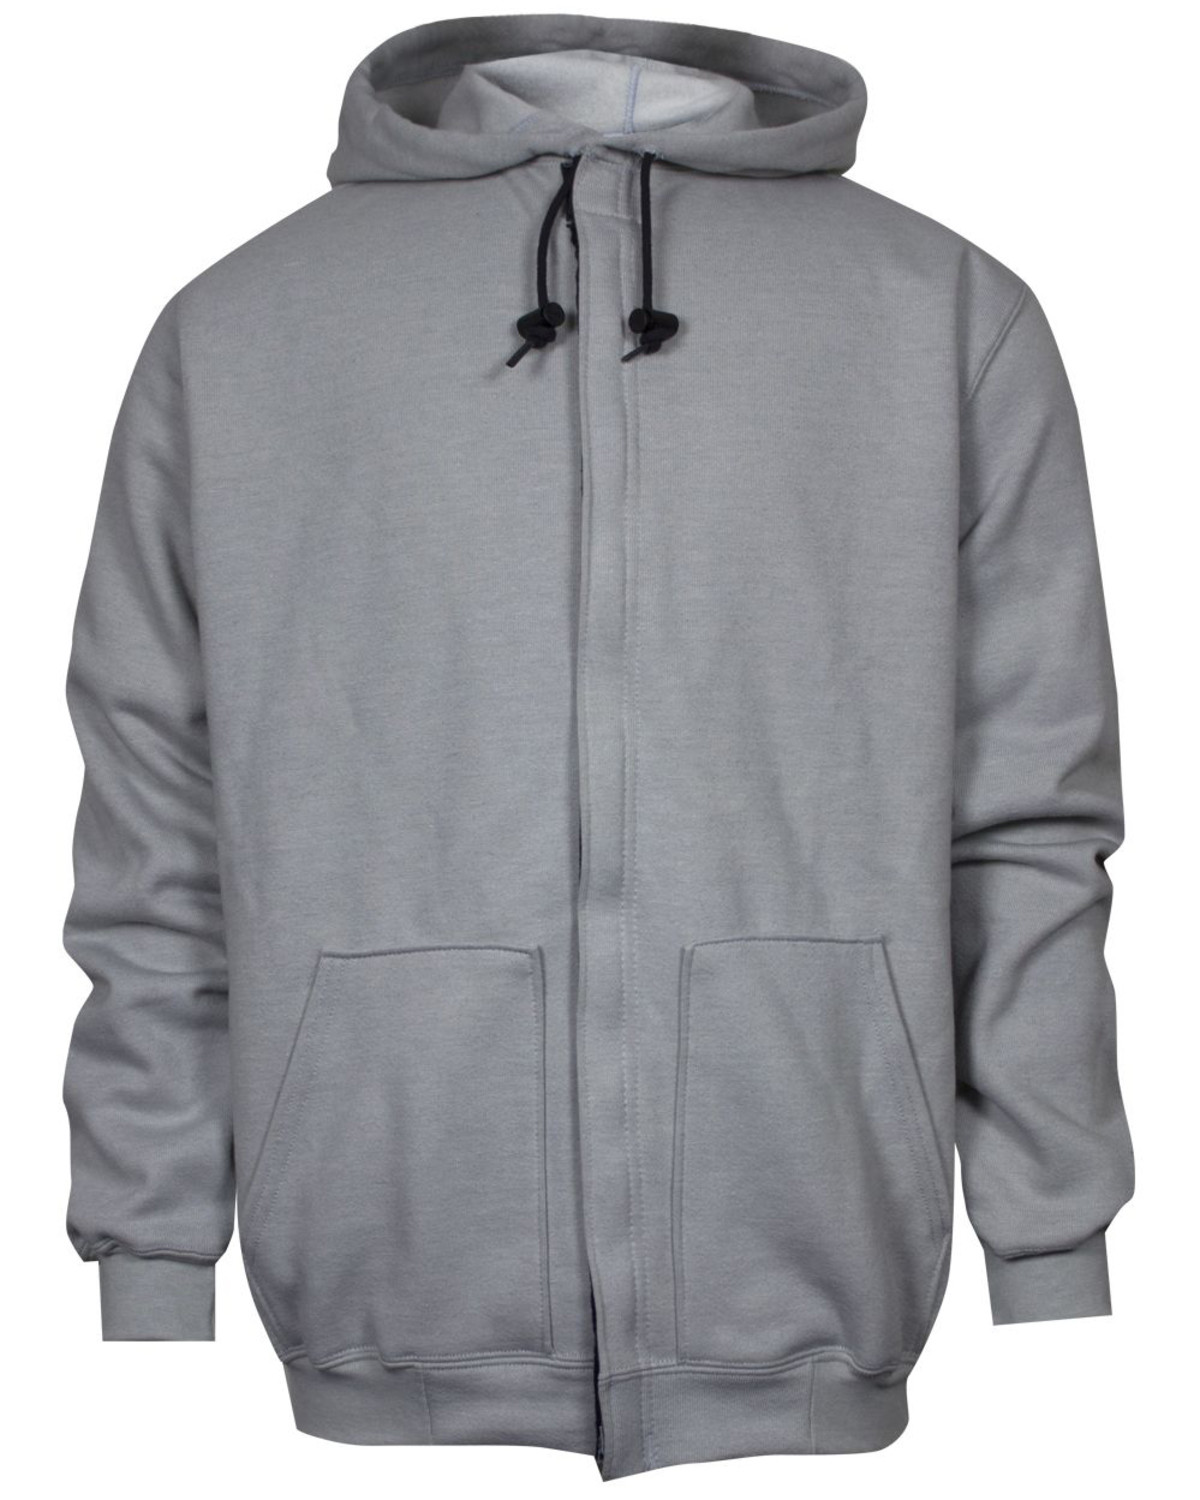 National Safety Apparel Men's Grey FR Heavyweight Zip Front Hooded Work ...